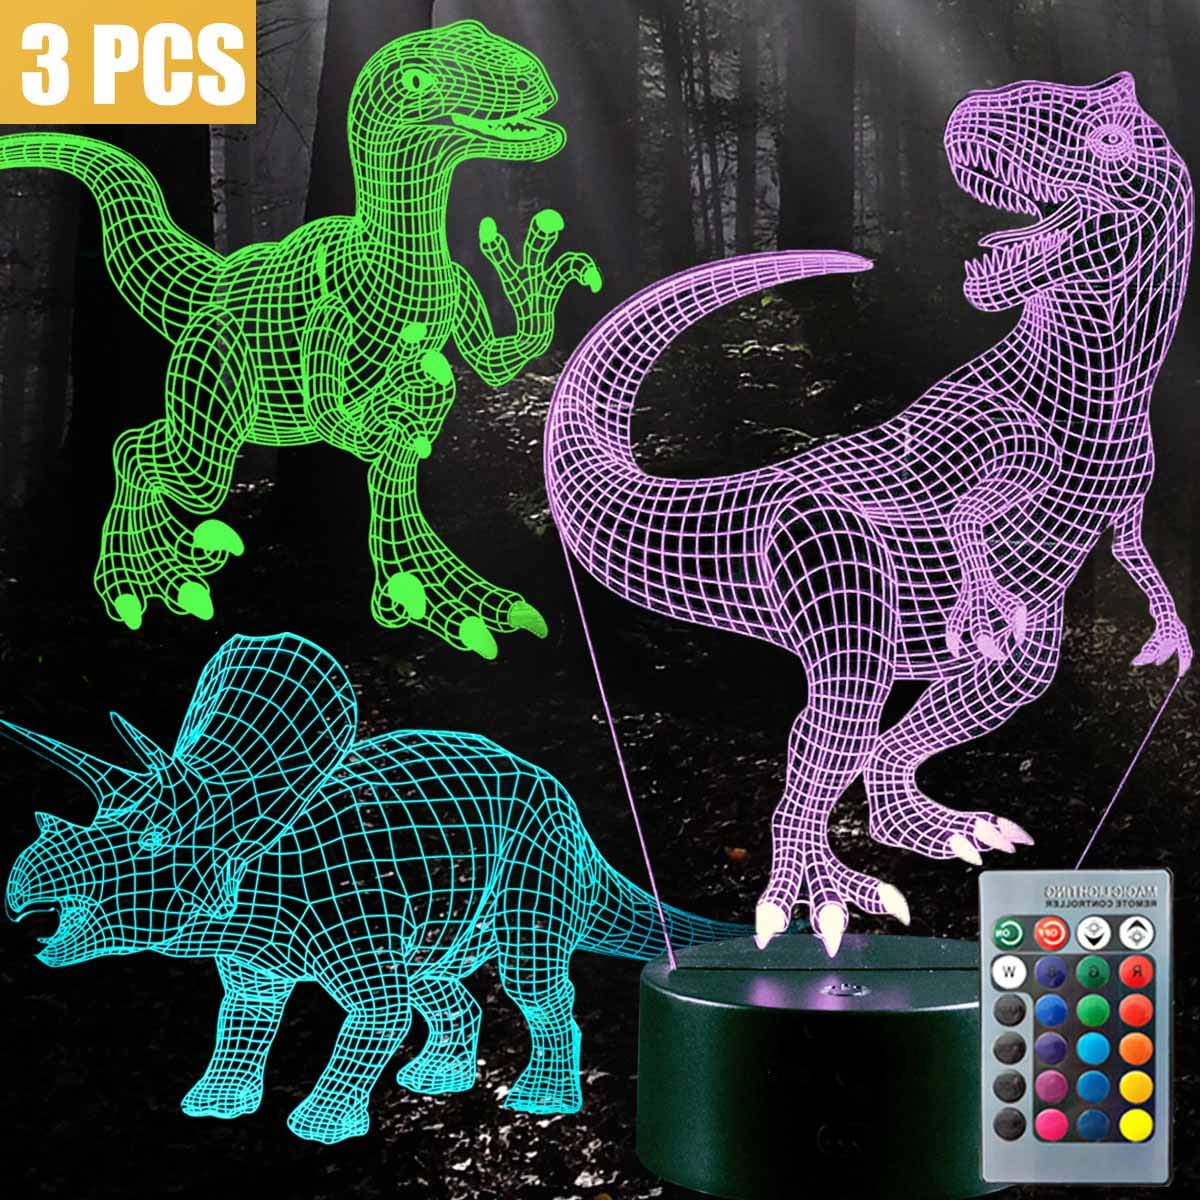 XiaoDing Dinosaur Lamp Kits 3D Night Light Illusion Lamp 4 Patterns with Remote 16 Color Change Decor Lamp Dinosaur Gifts for Children